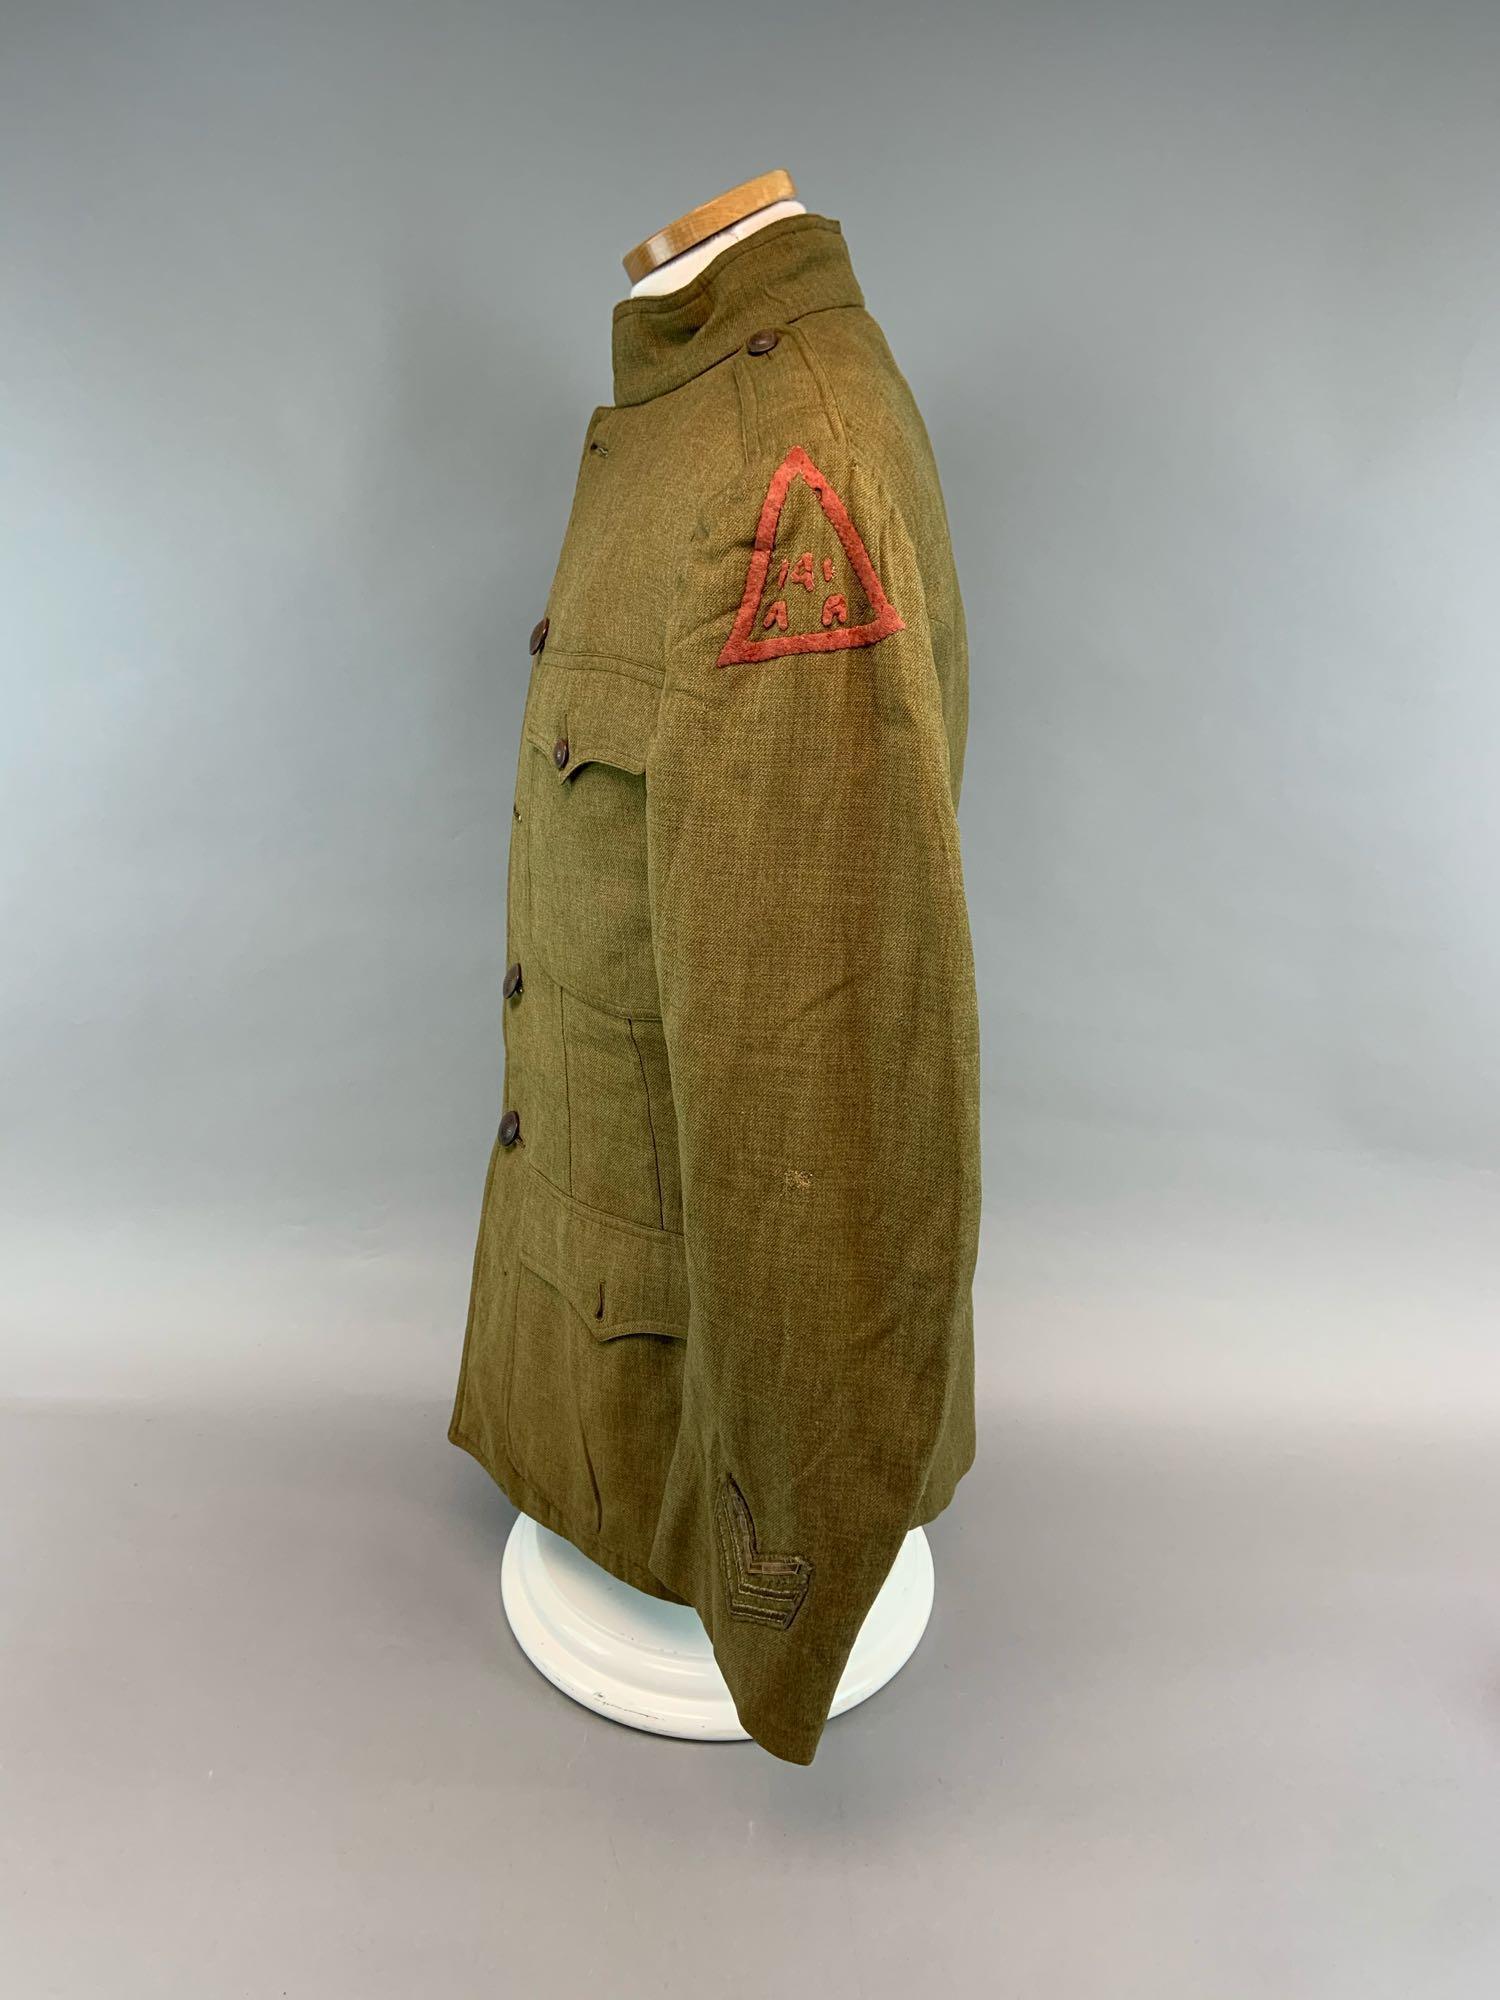 WW1 US Enlisted Private Purchase Tunic